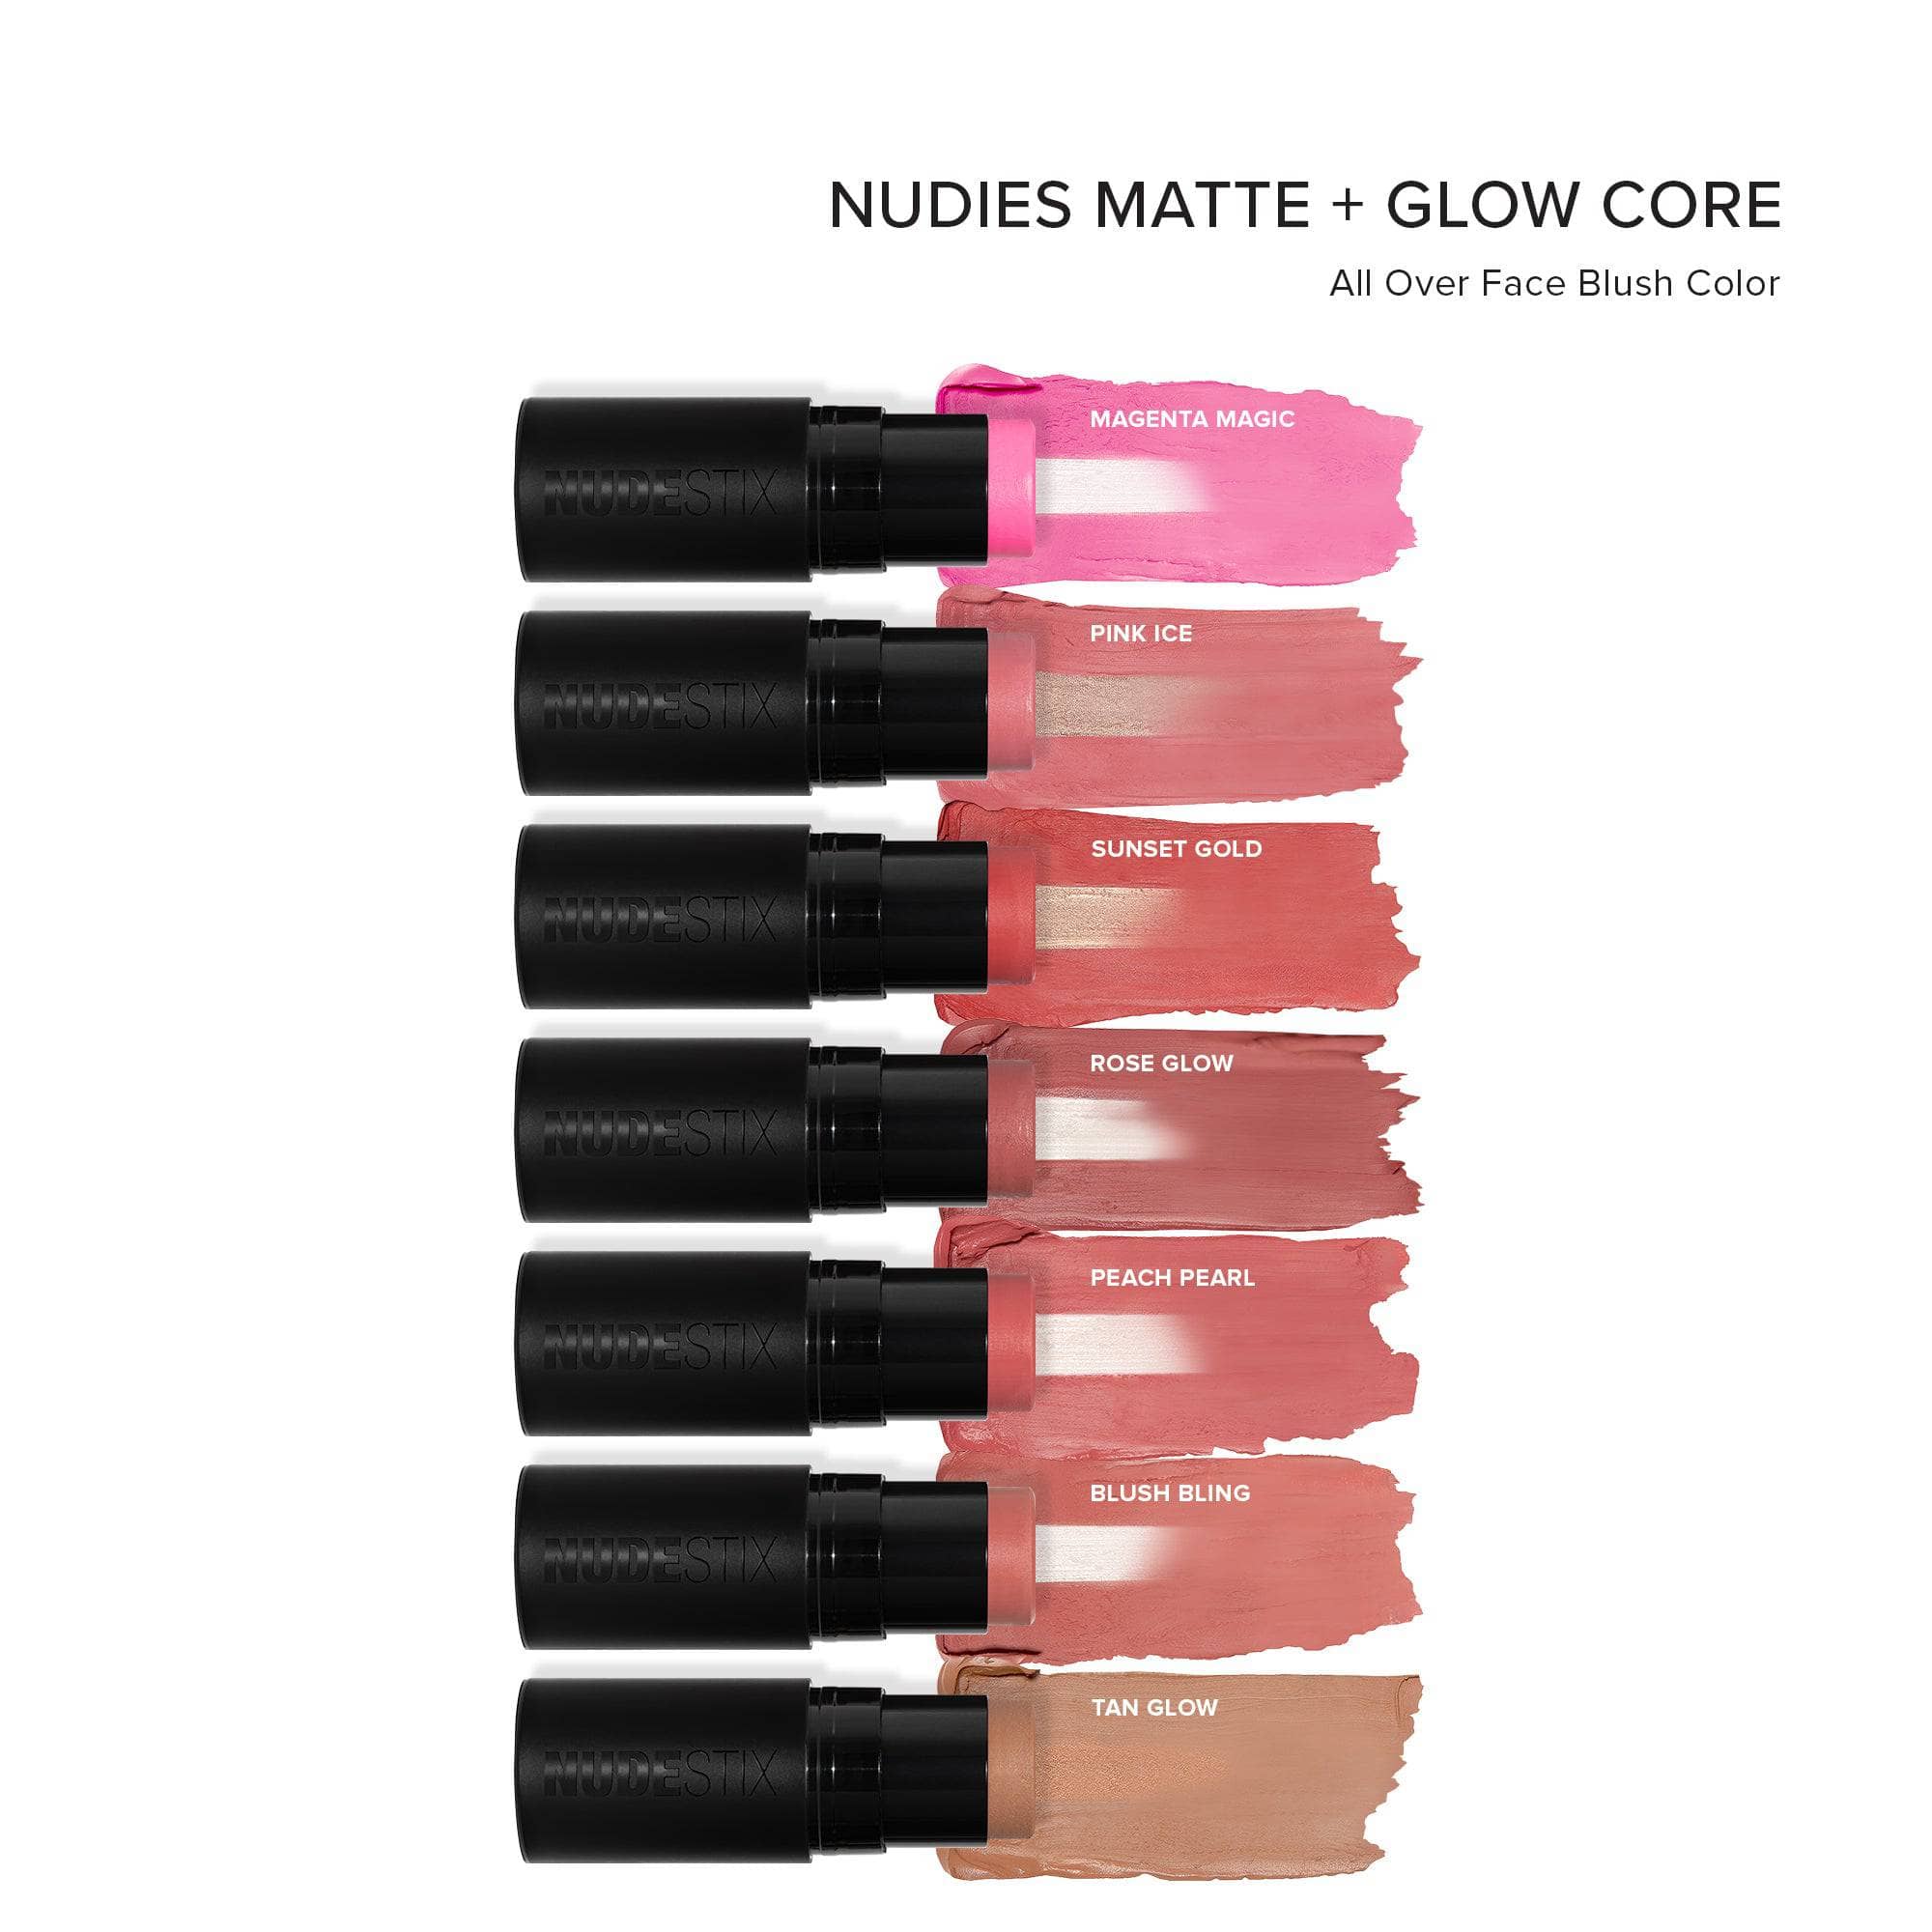 Nudies Matte Glow Core swatches with all shades